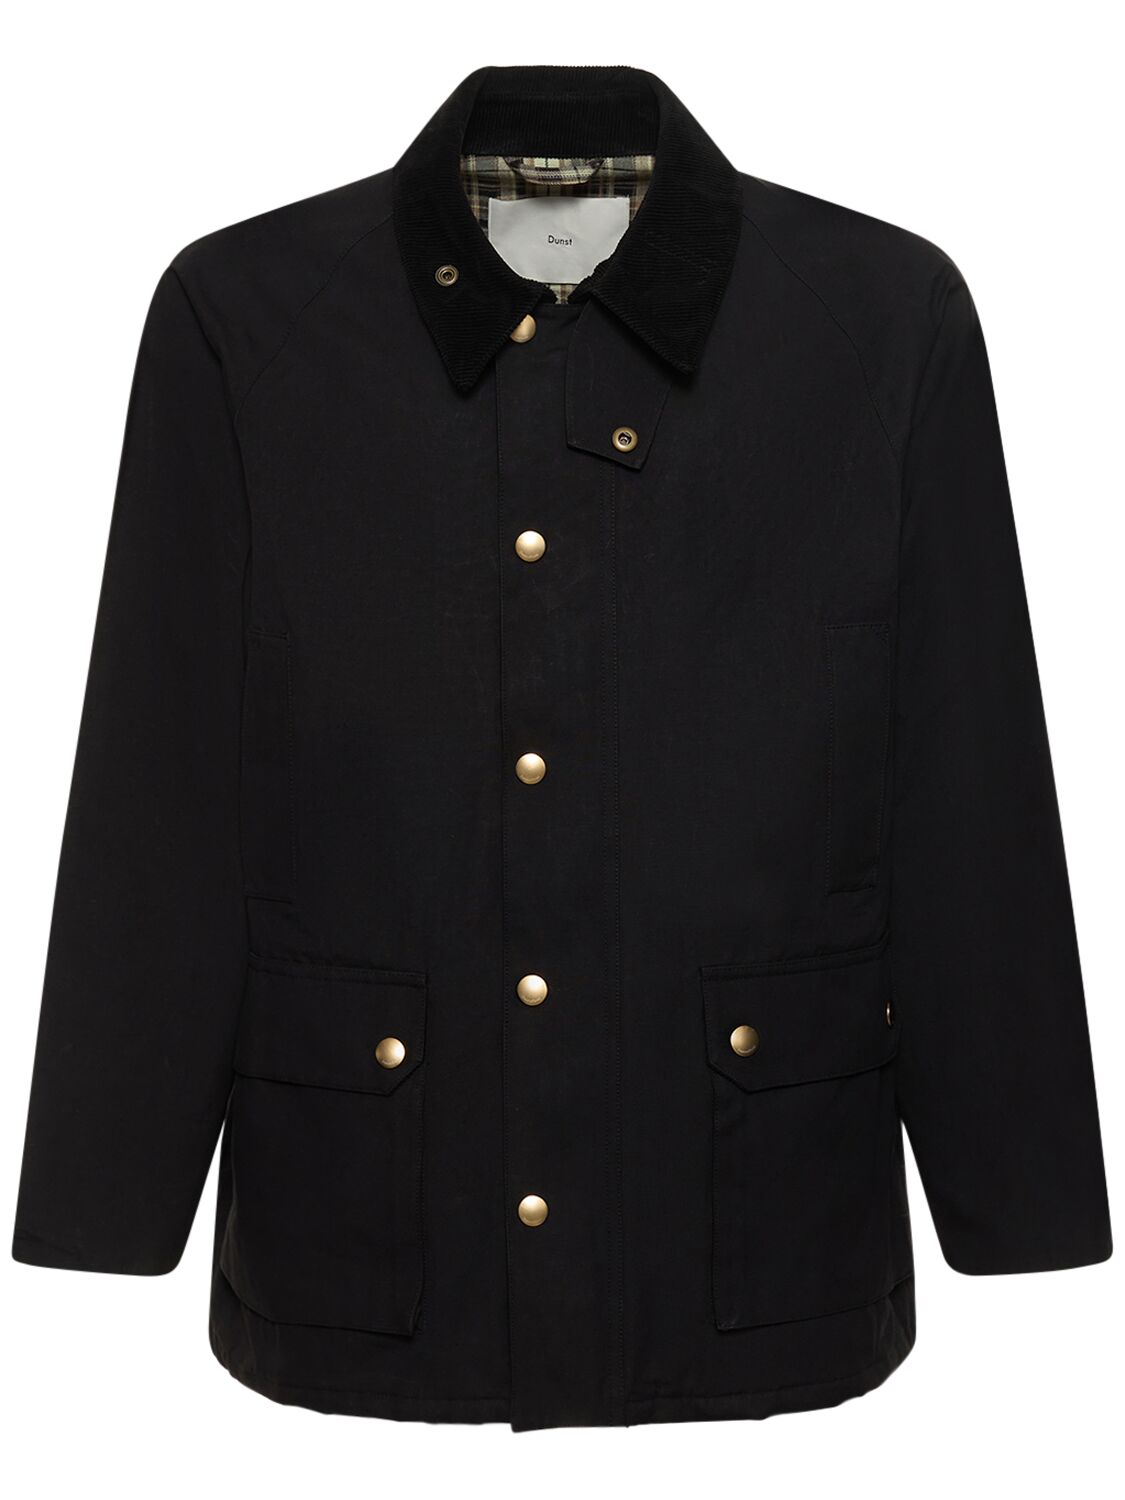 Dunst Unisex Waxed Cotton Hunting Jacket In Black